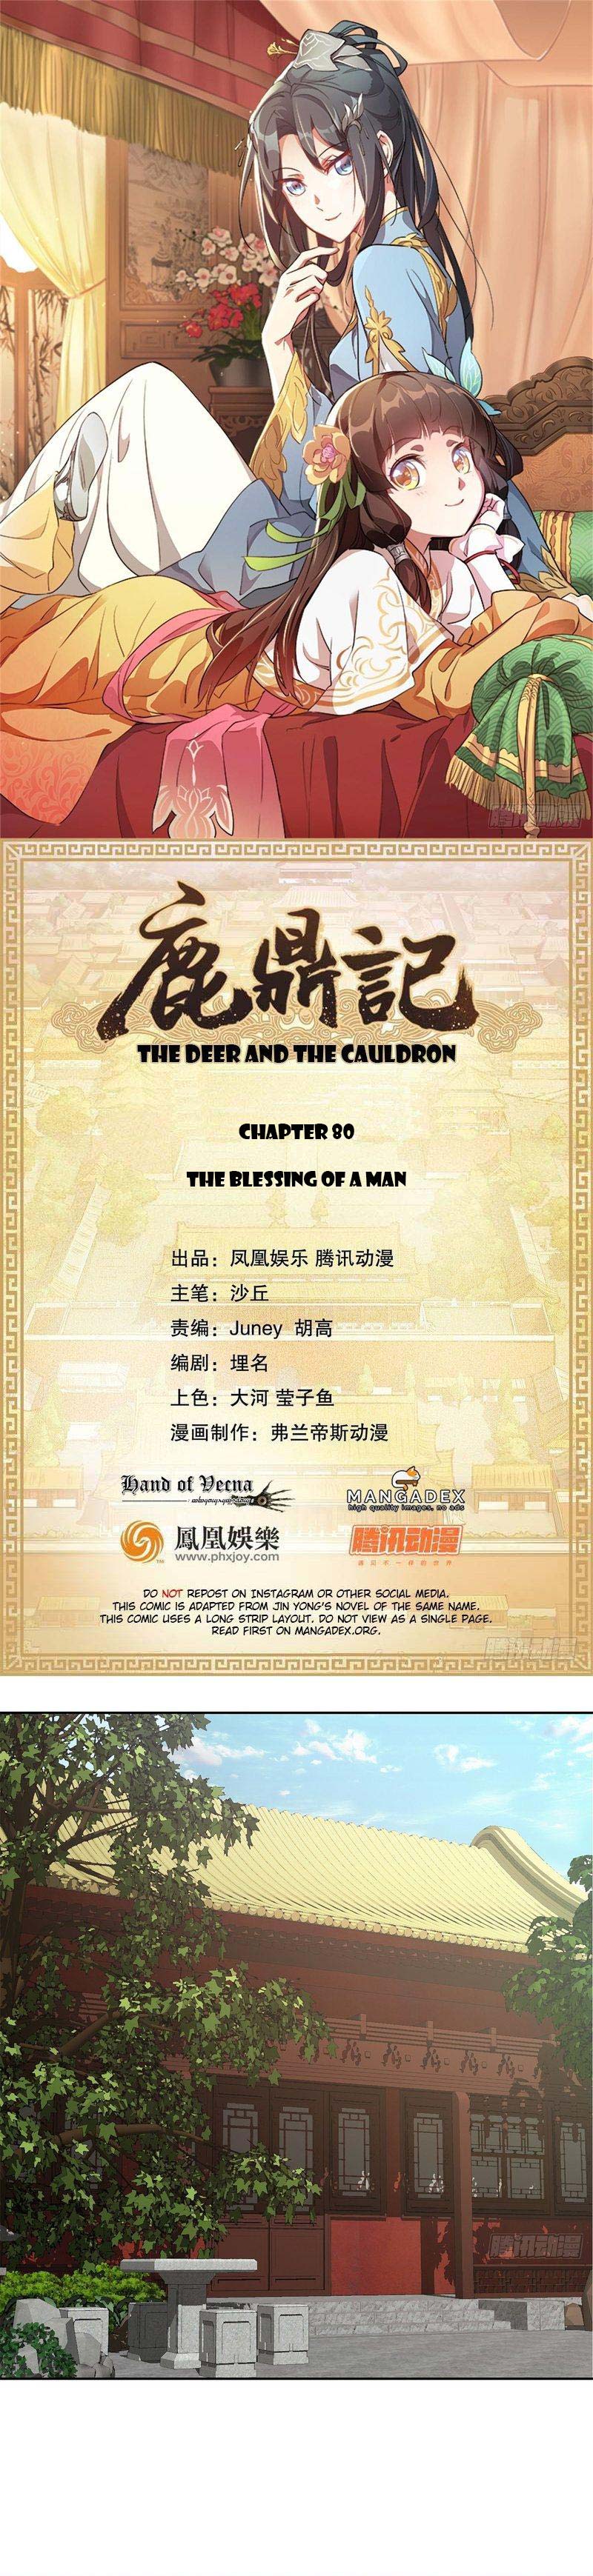 The Deer and the Cauldron Ch. 80 The Blessing of a Man